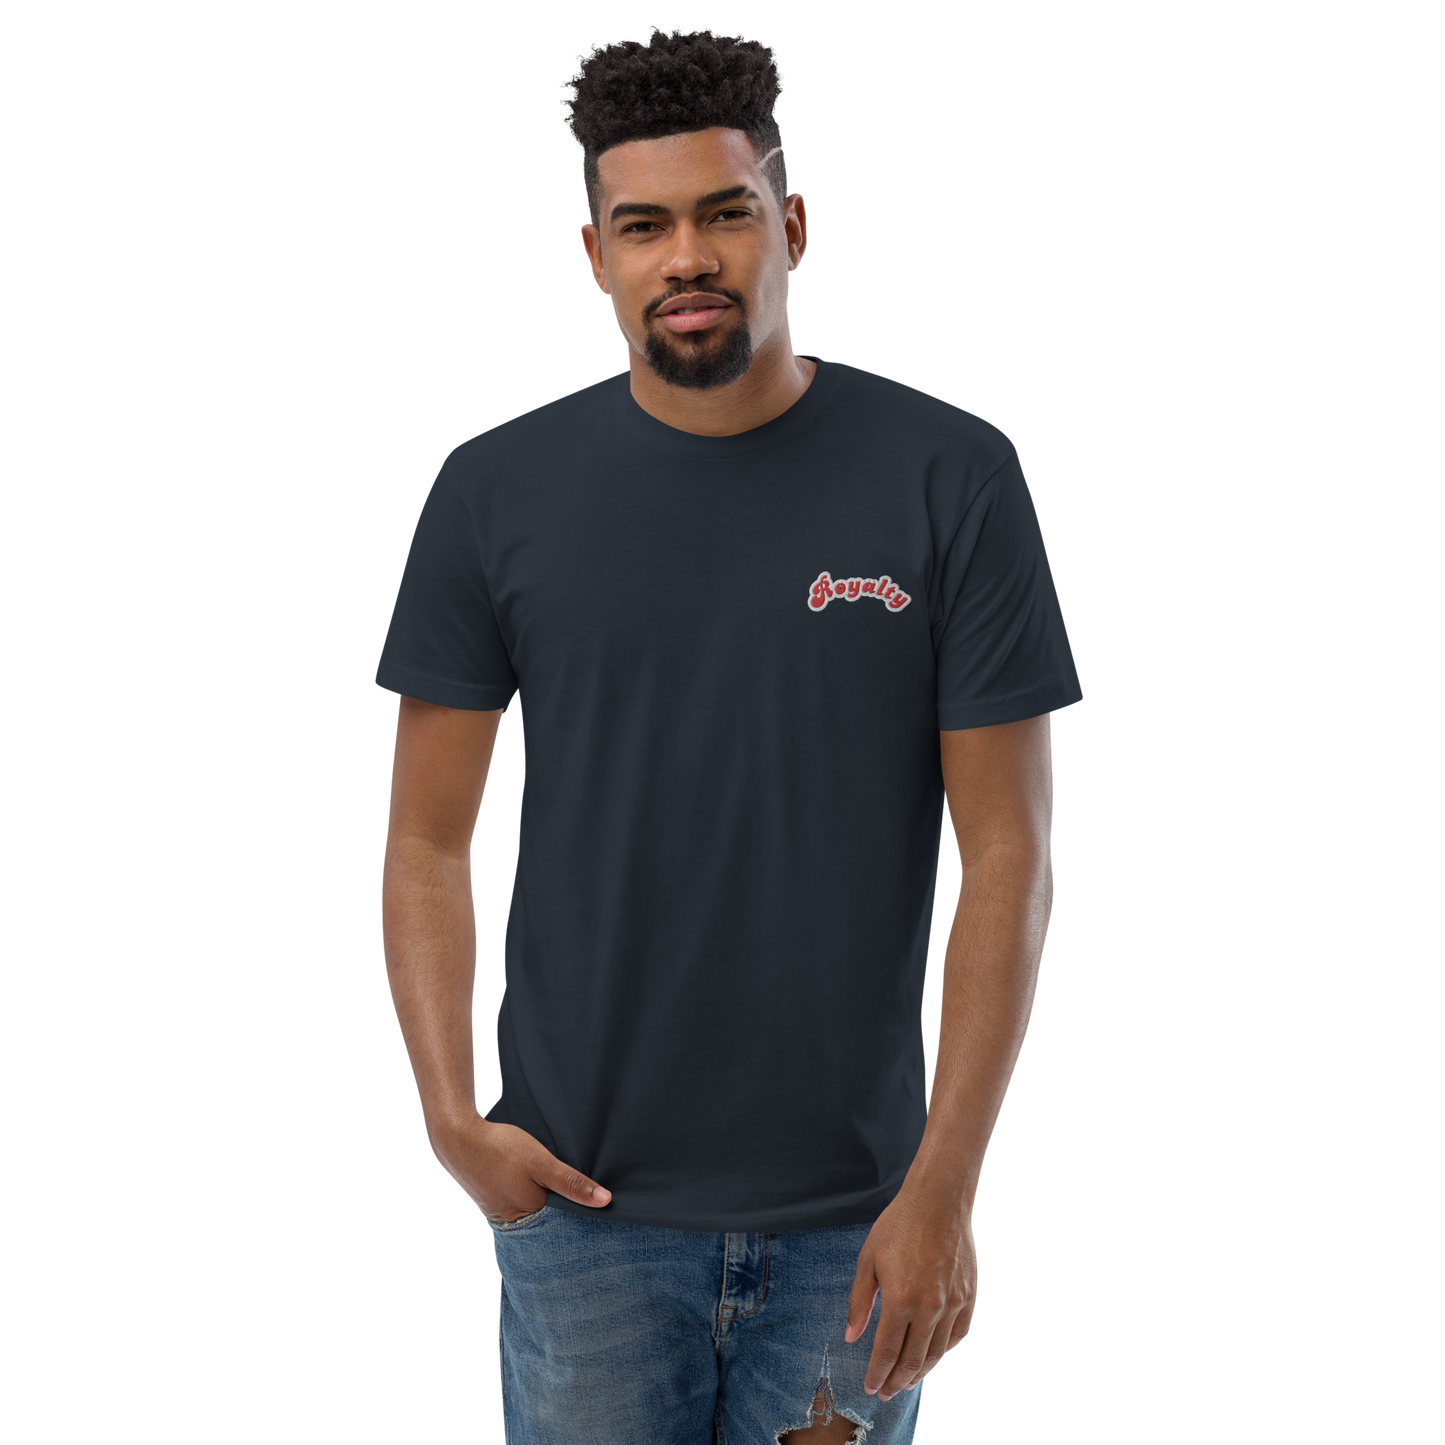 Royalty embroidered logo - Short Sleeve T-shirt